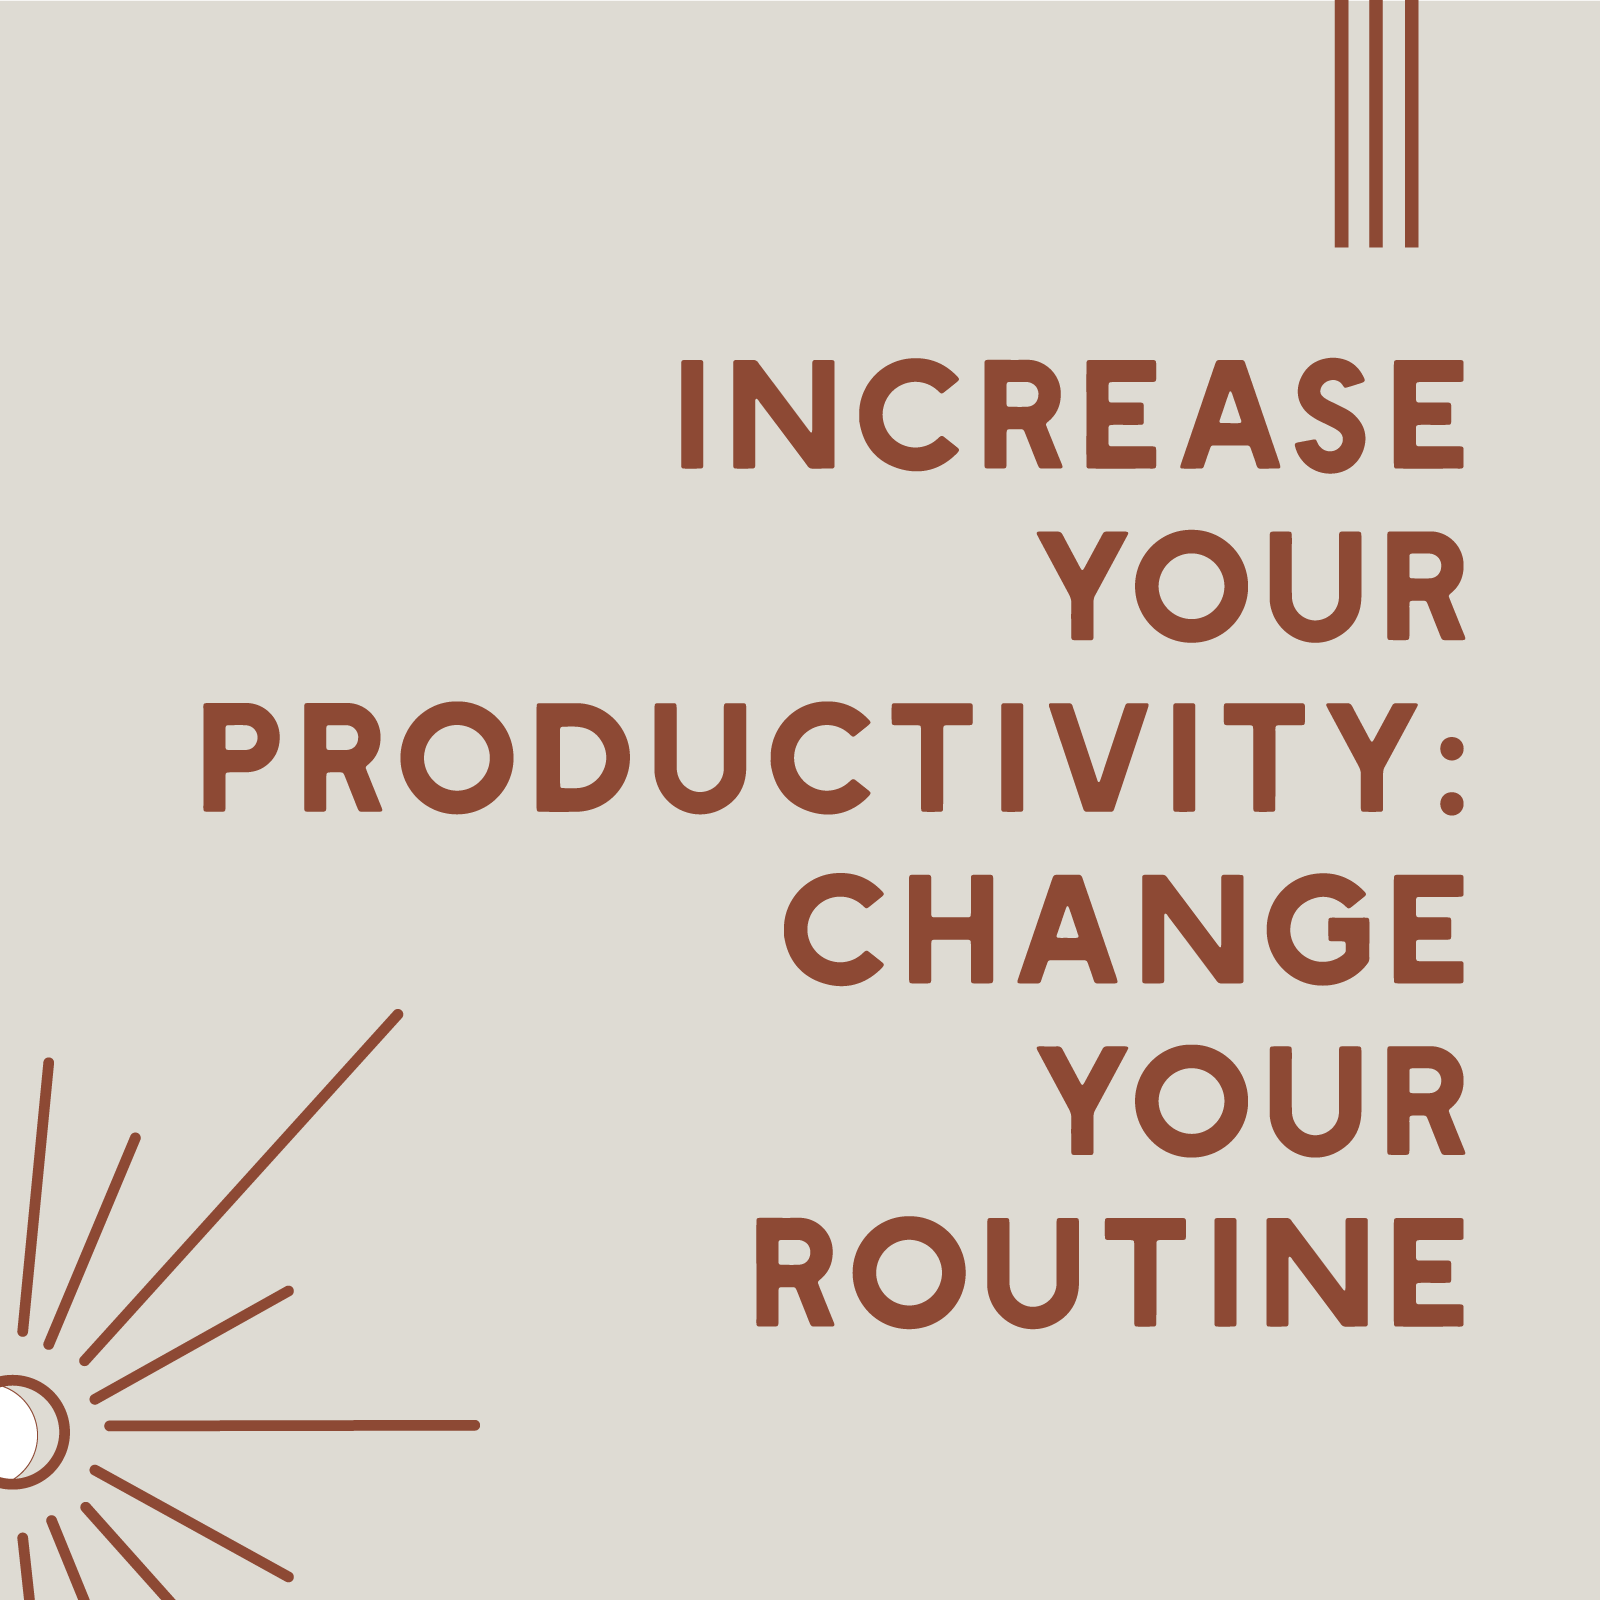 Change Your Routine to Increase Your Productivity